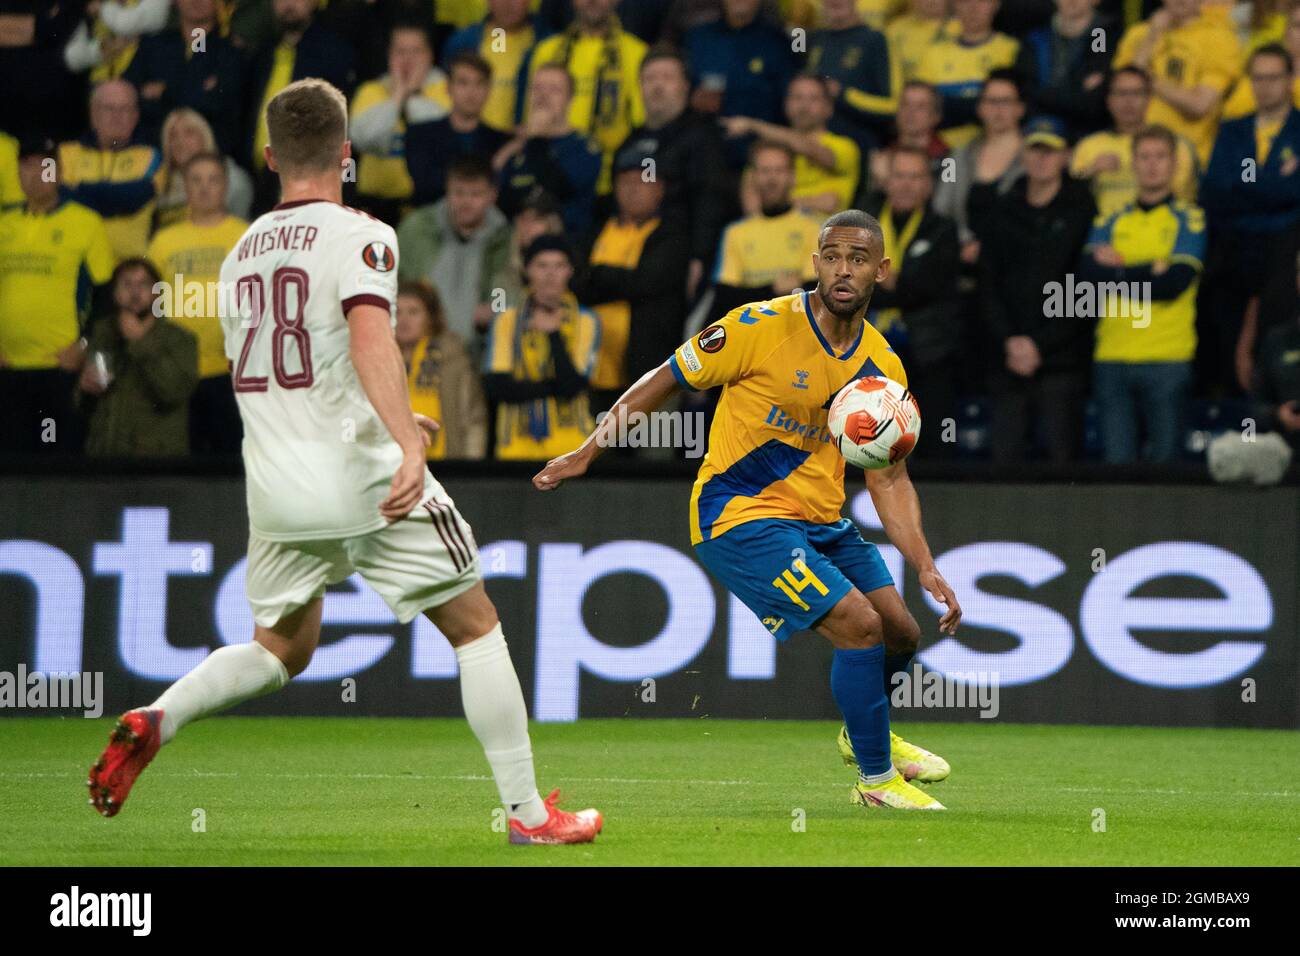 Broendby, Denmark. 16th, September 2021. Kevin Mensah (14) of Broendby IF seen during the UEFA Europa League match between Broendby IF and Sparta Prague at Broendby Stadion in Broendby. (Photo credit: Gonzales Photo - Gaston Szerman). Stock Photo